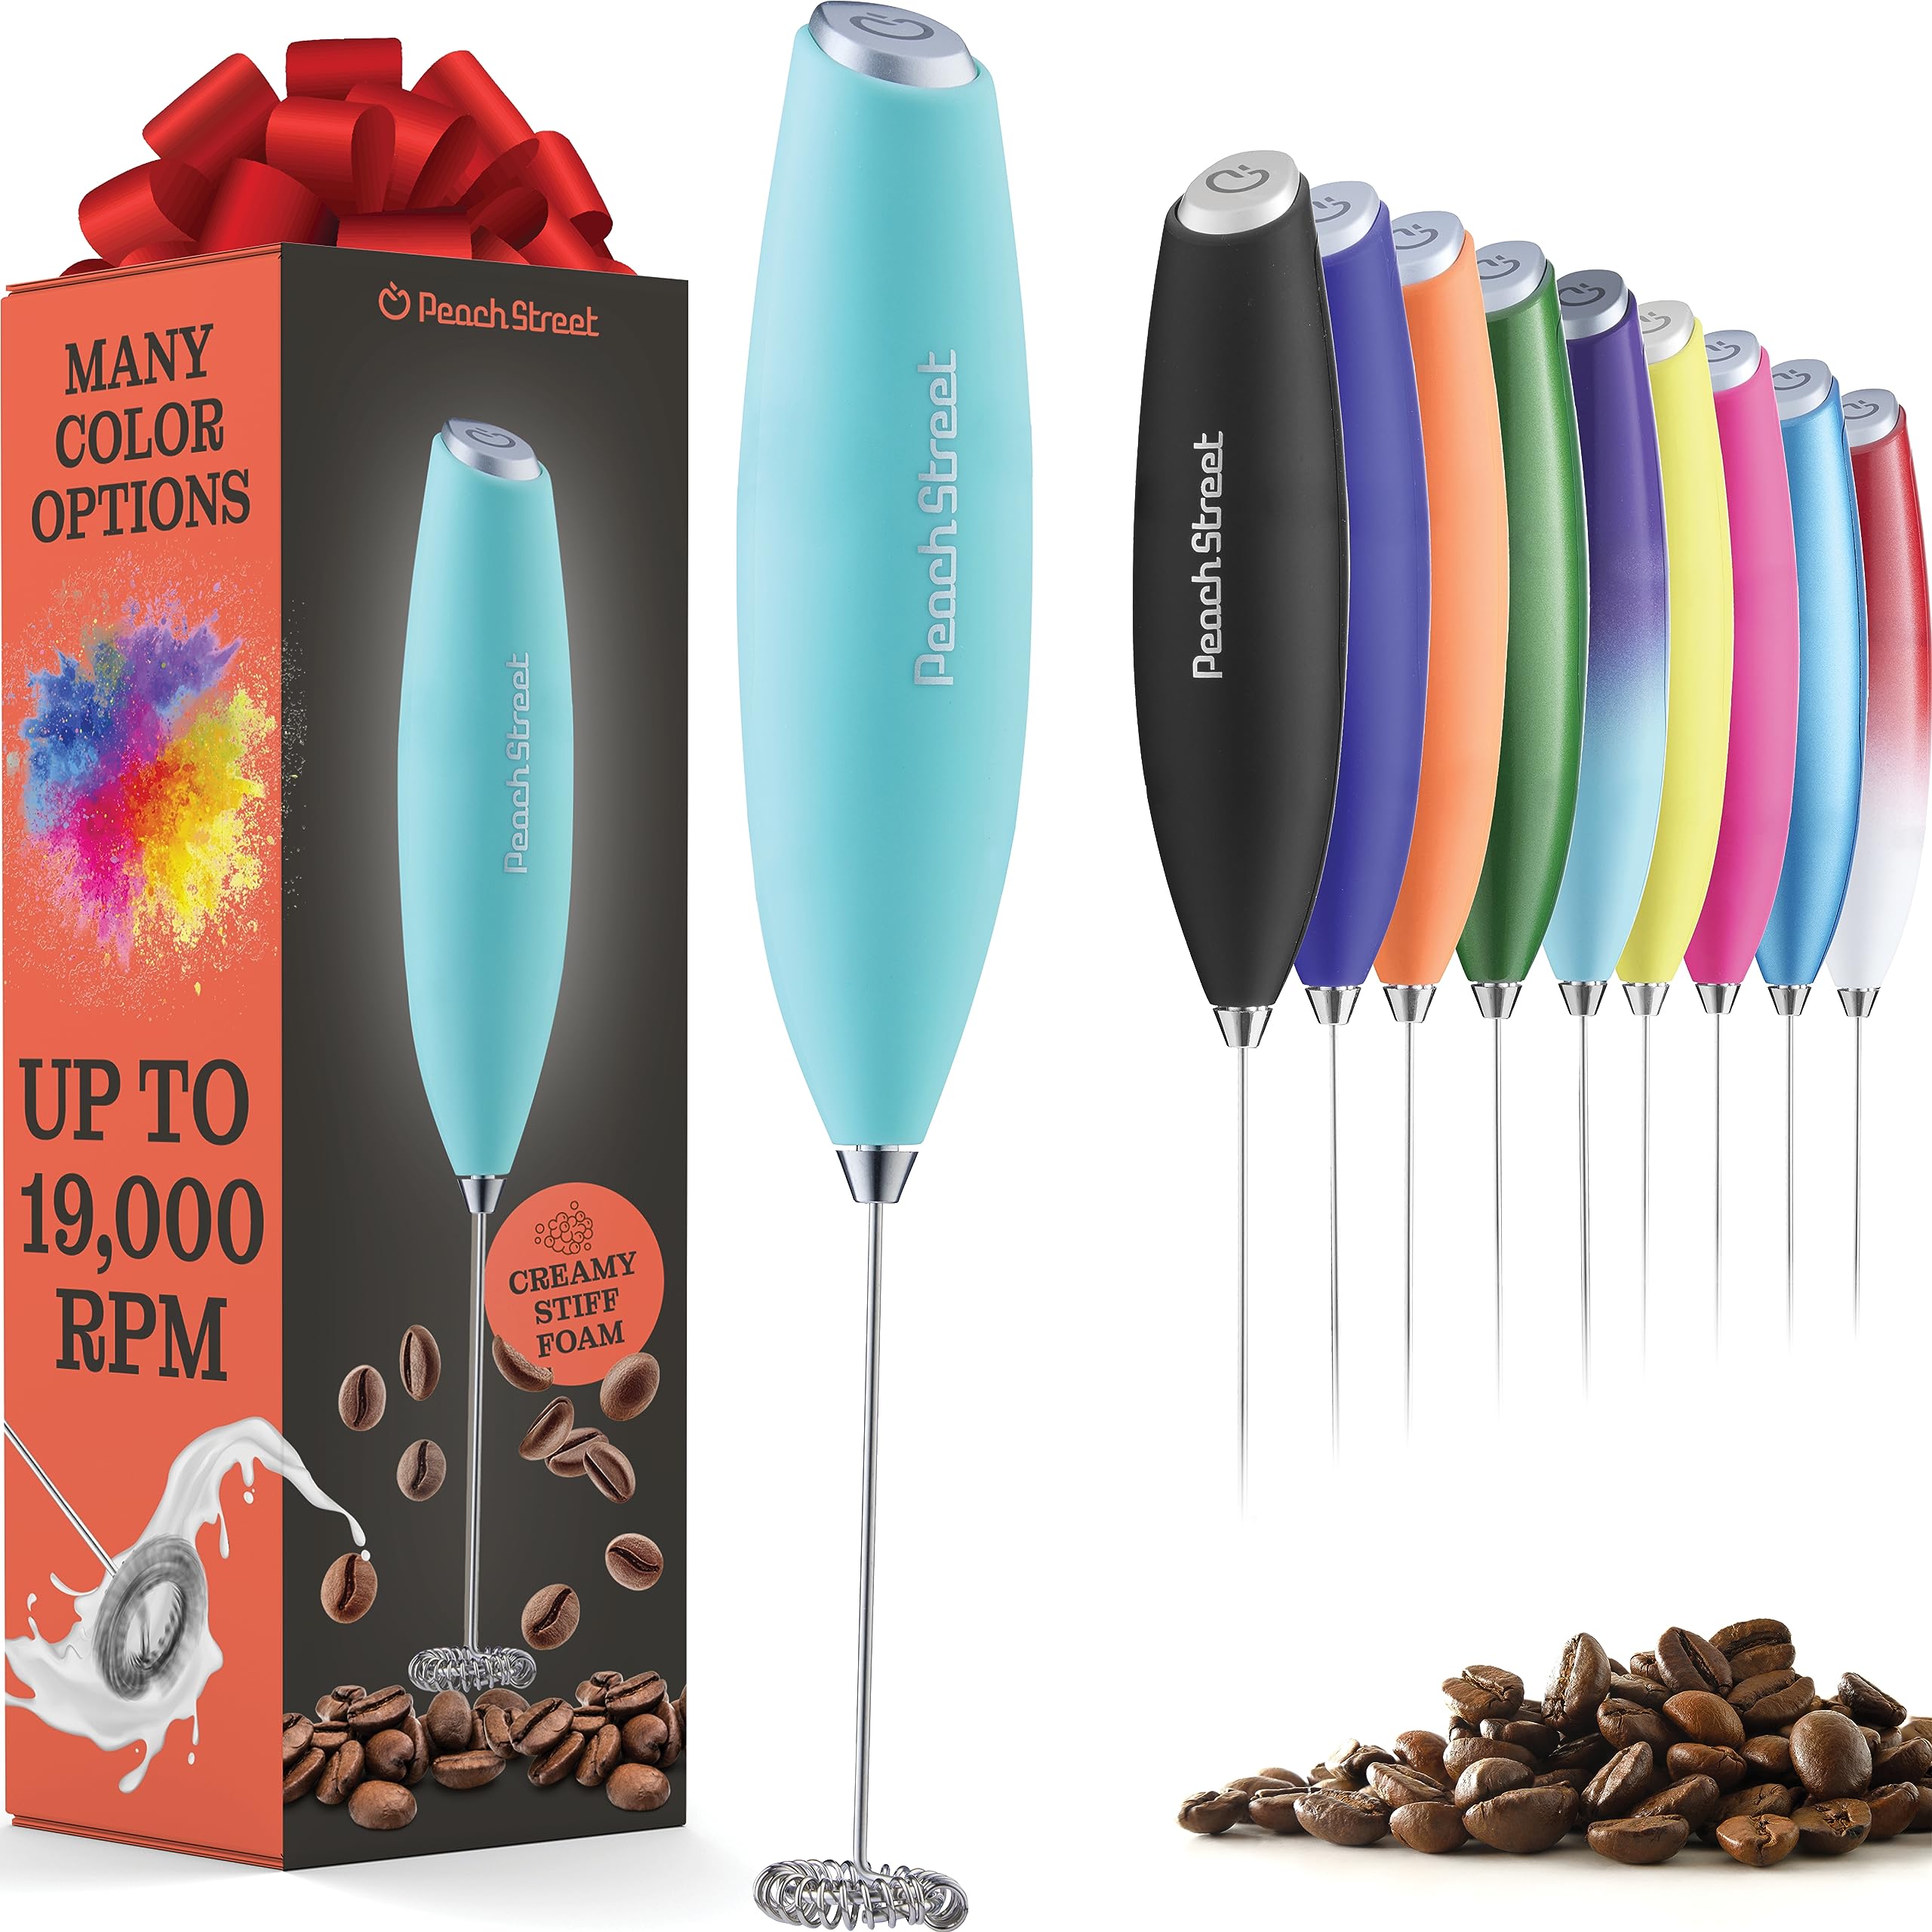 Powerful Handheld Milk Frother, Mini Milk Foamer, Battery Operated (Not included) Stainless Steel Drink Mixer for Coffee, Lattes, Cappuccino, Frappe, Matcha, Hot Chocolate.  - Good